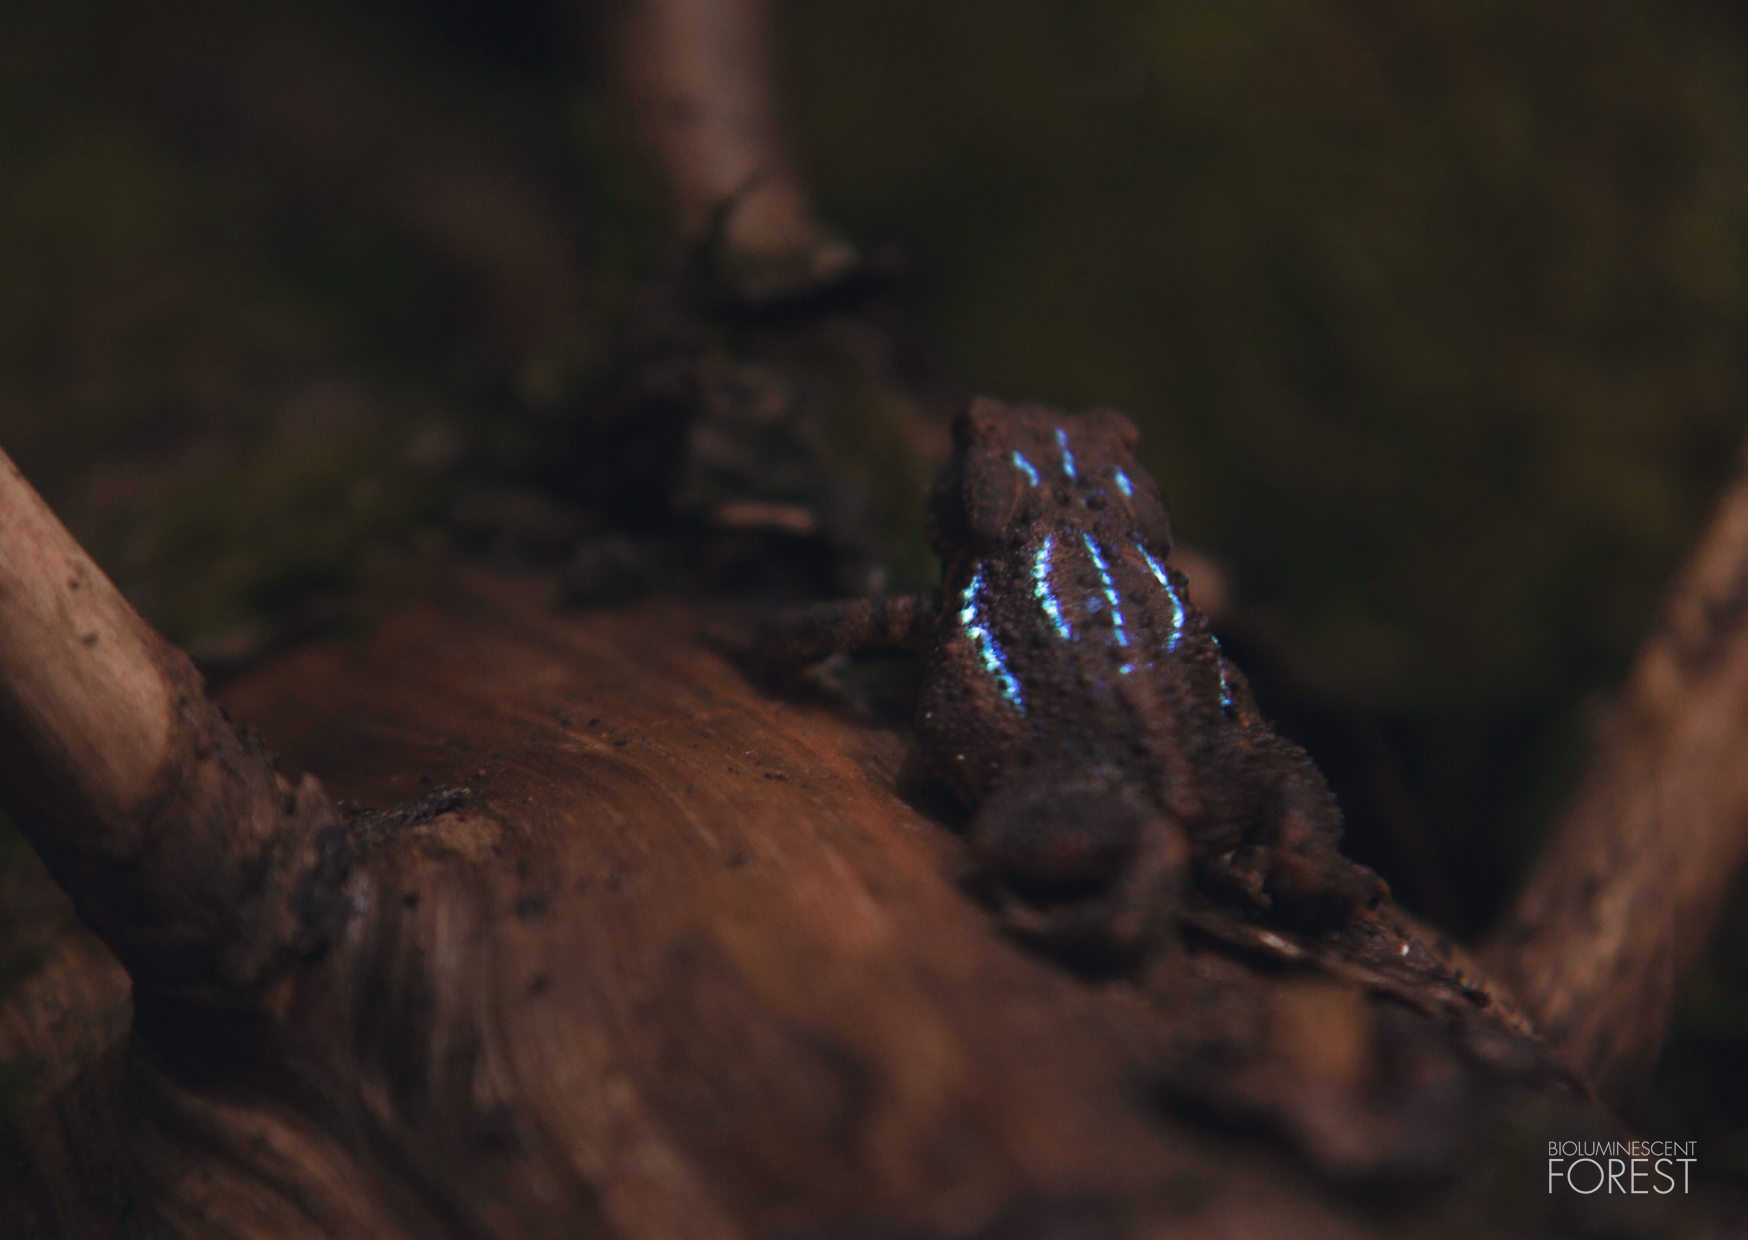 Bioluminescent forest – Toad